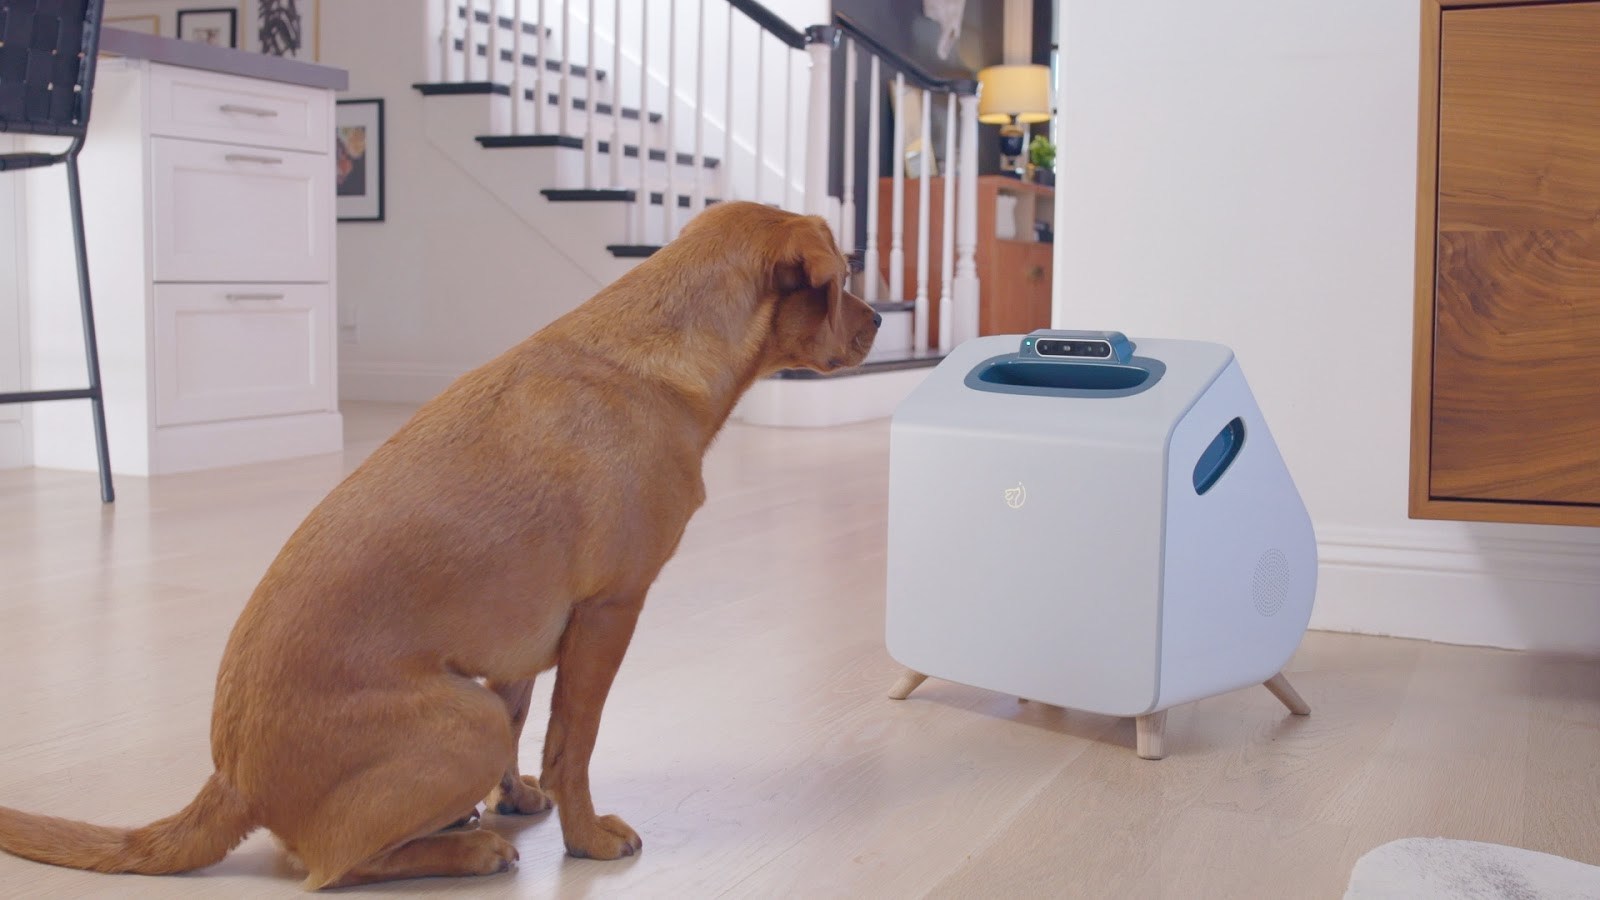 Machine learning and computer vision to talk to dogs